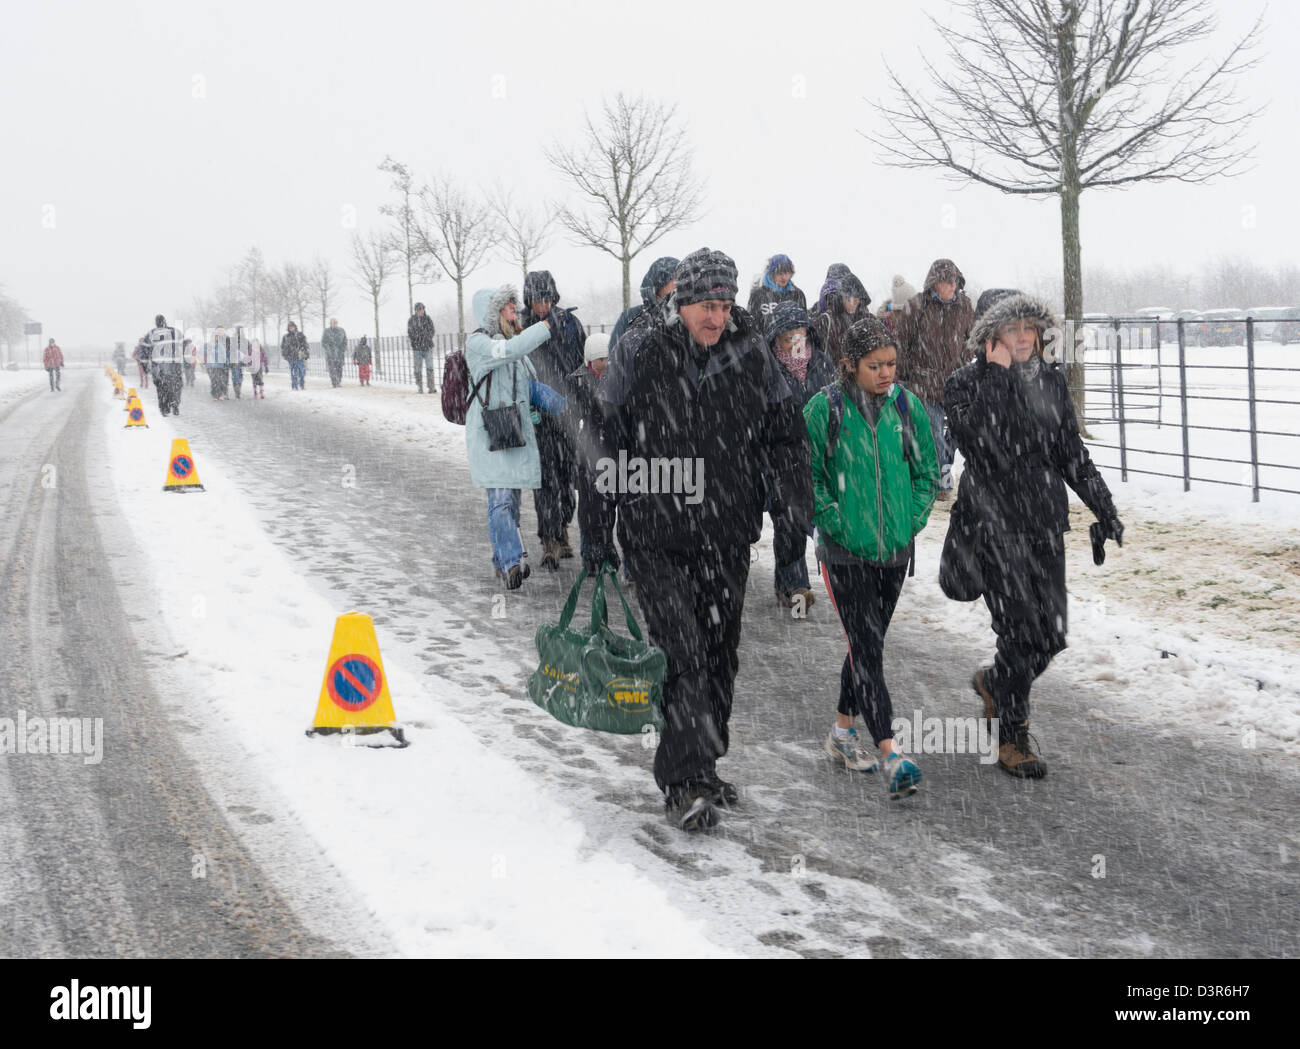 Herrington Country Park, Sunderland, UK. 23rd February 2013. Snow as competitors arrive National cross country Championships 2013. Credit:  Washington Imaging / Alamy Live News Stock Photo